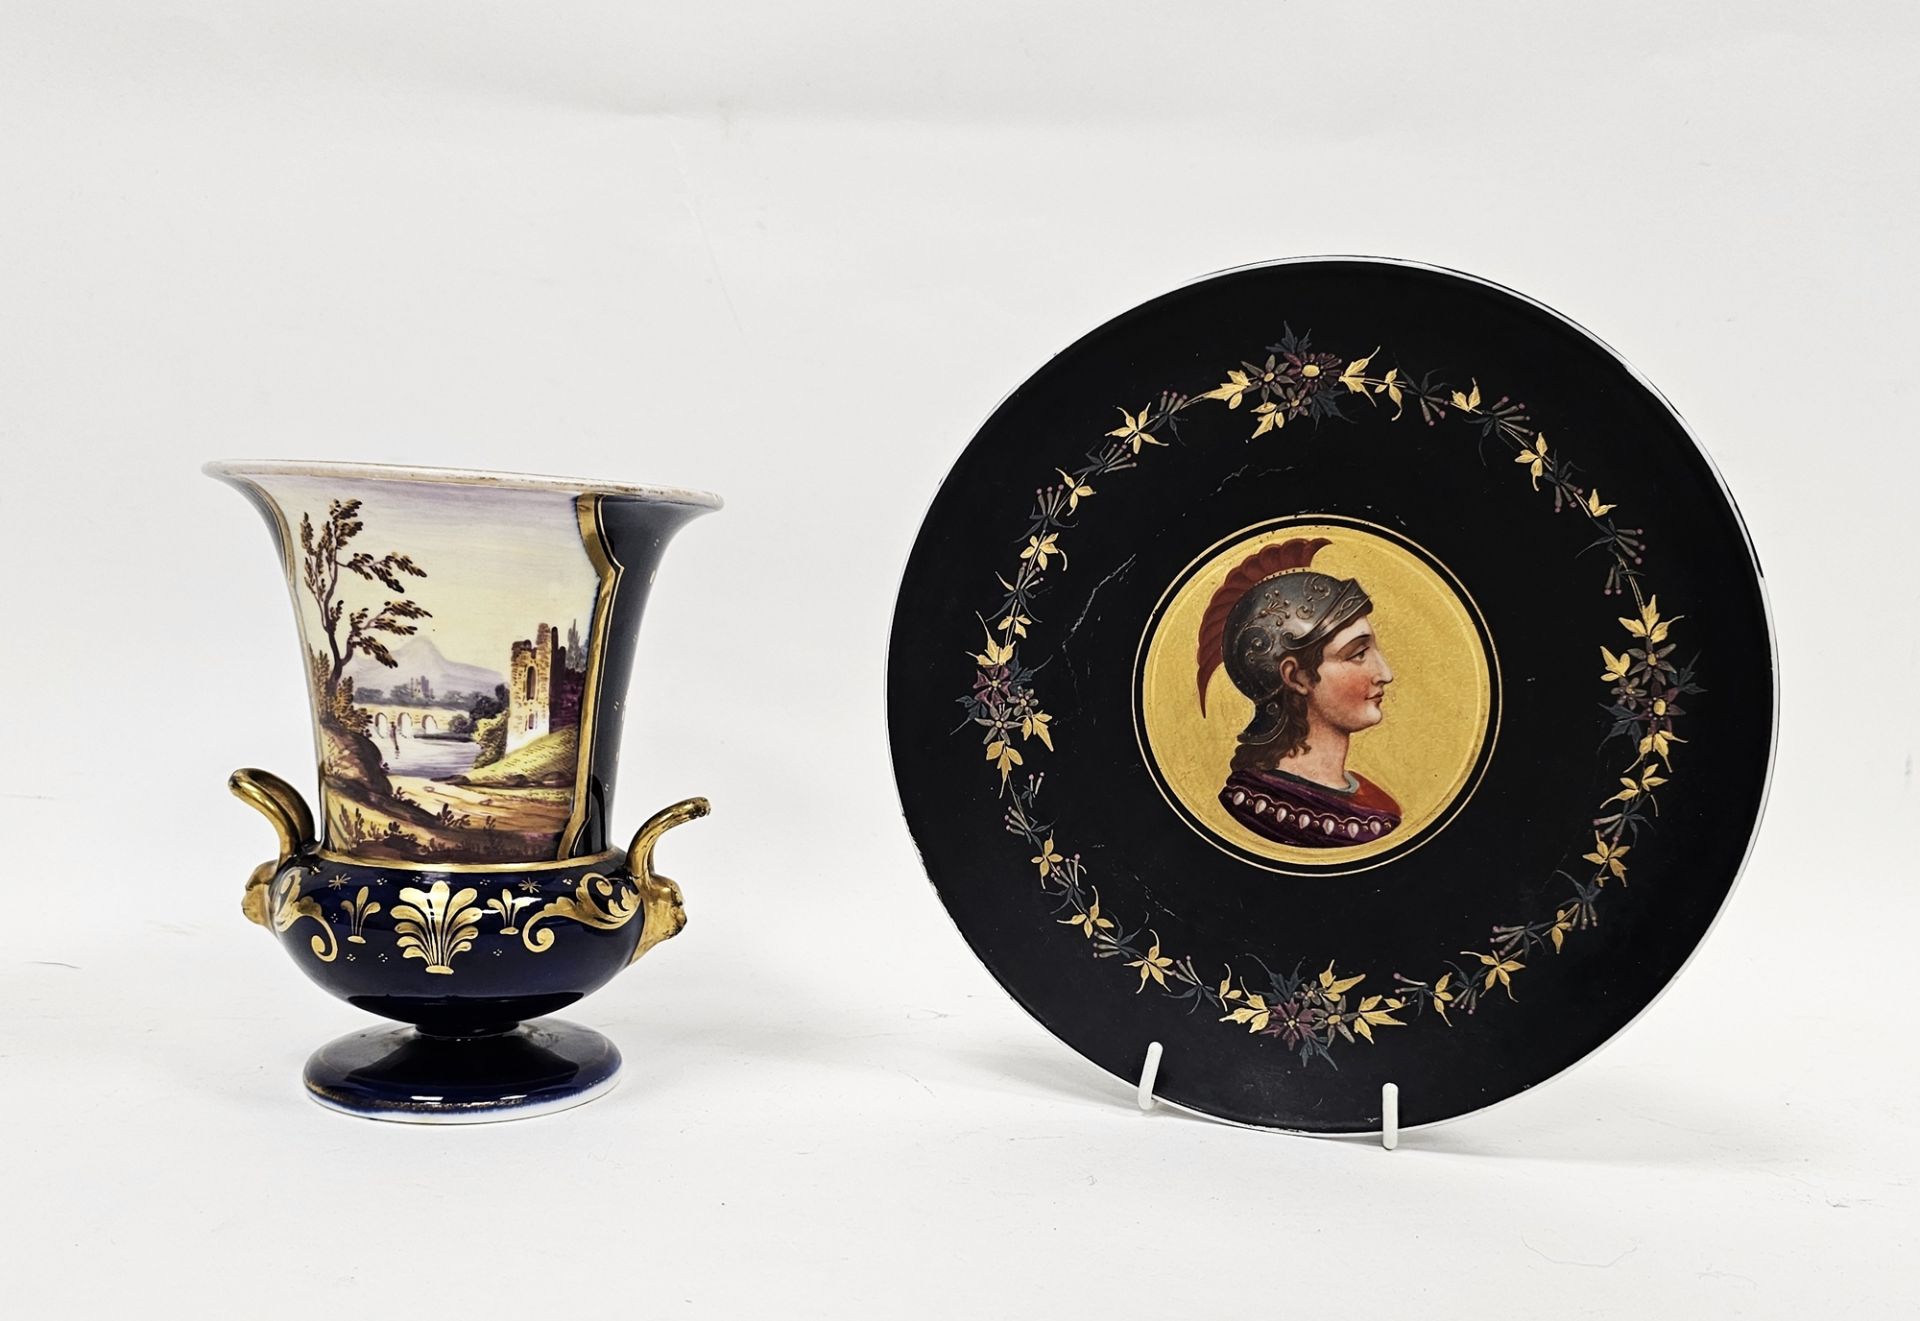 Early 19th century English porcelain dark-blue ground campana vase and a French porcelain matt